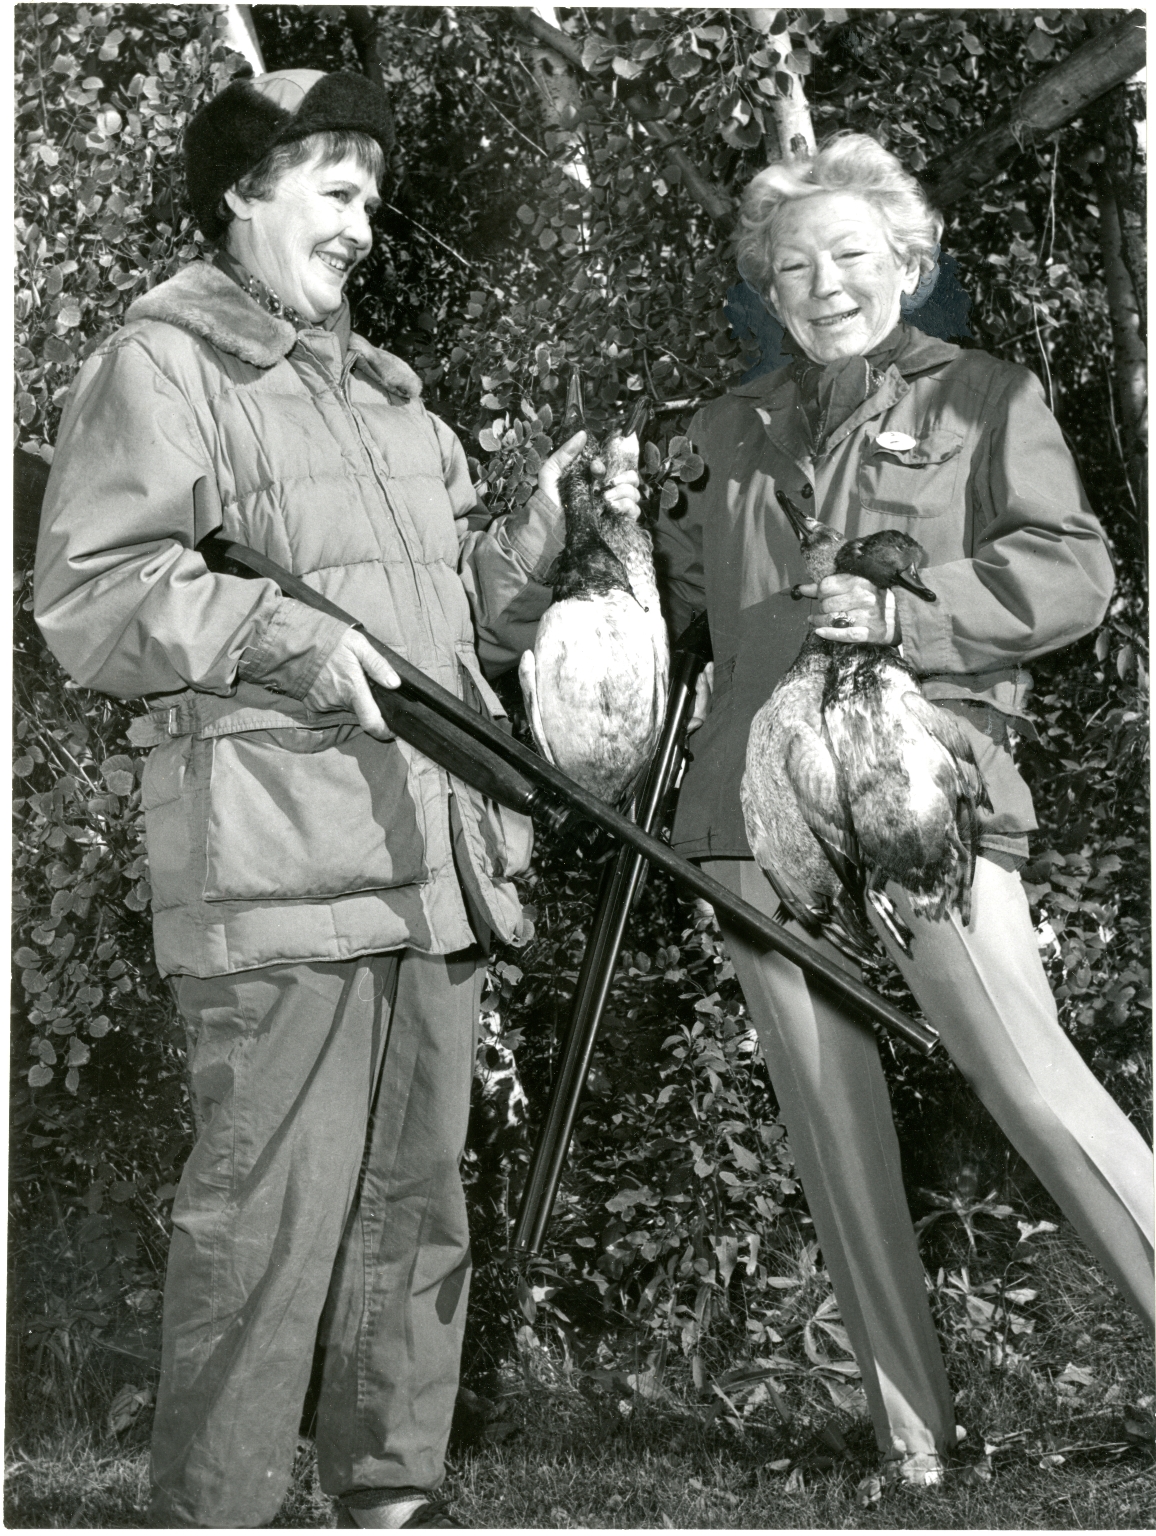 Mary and Friend Hunting Ducks